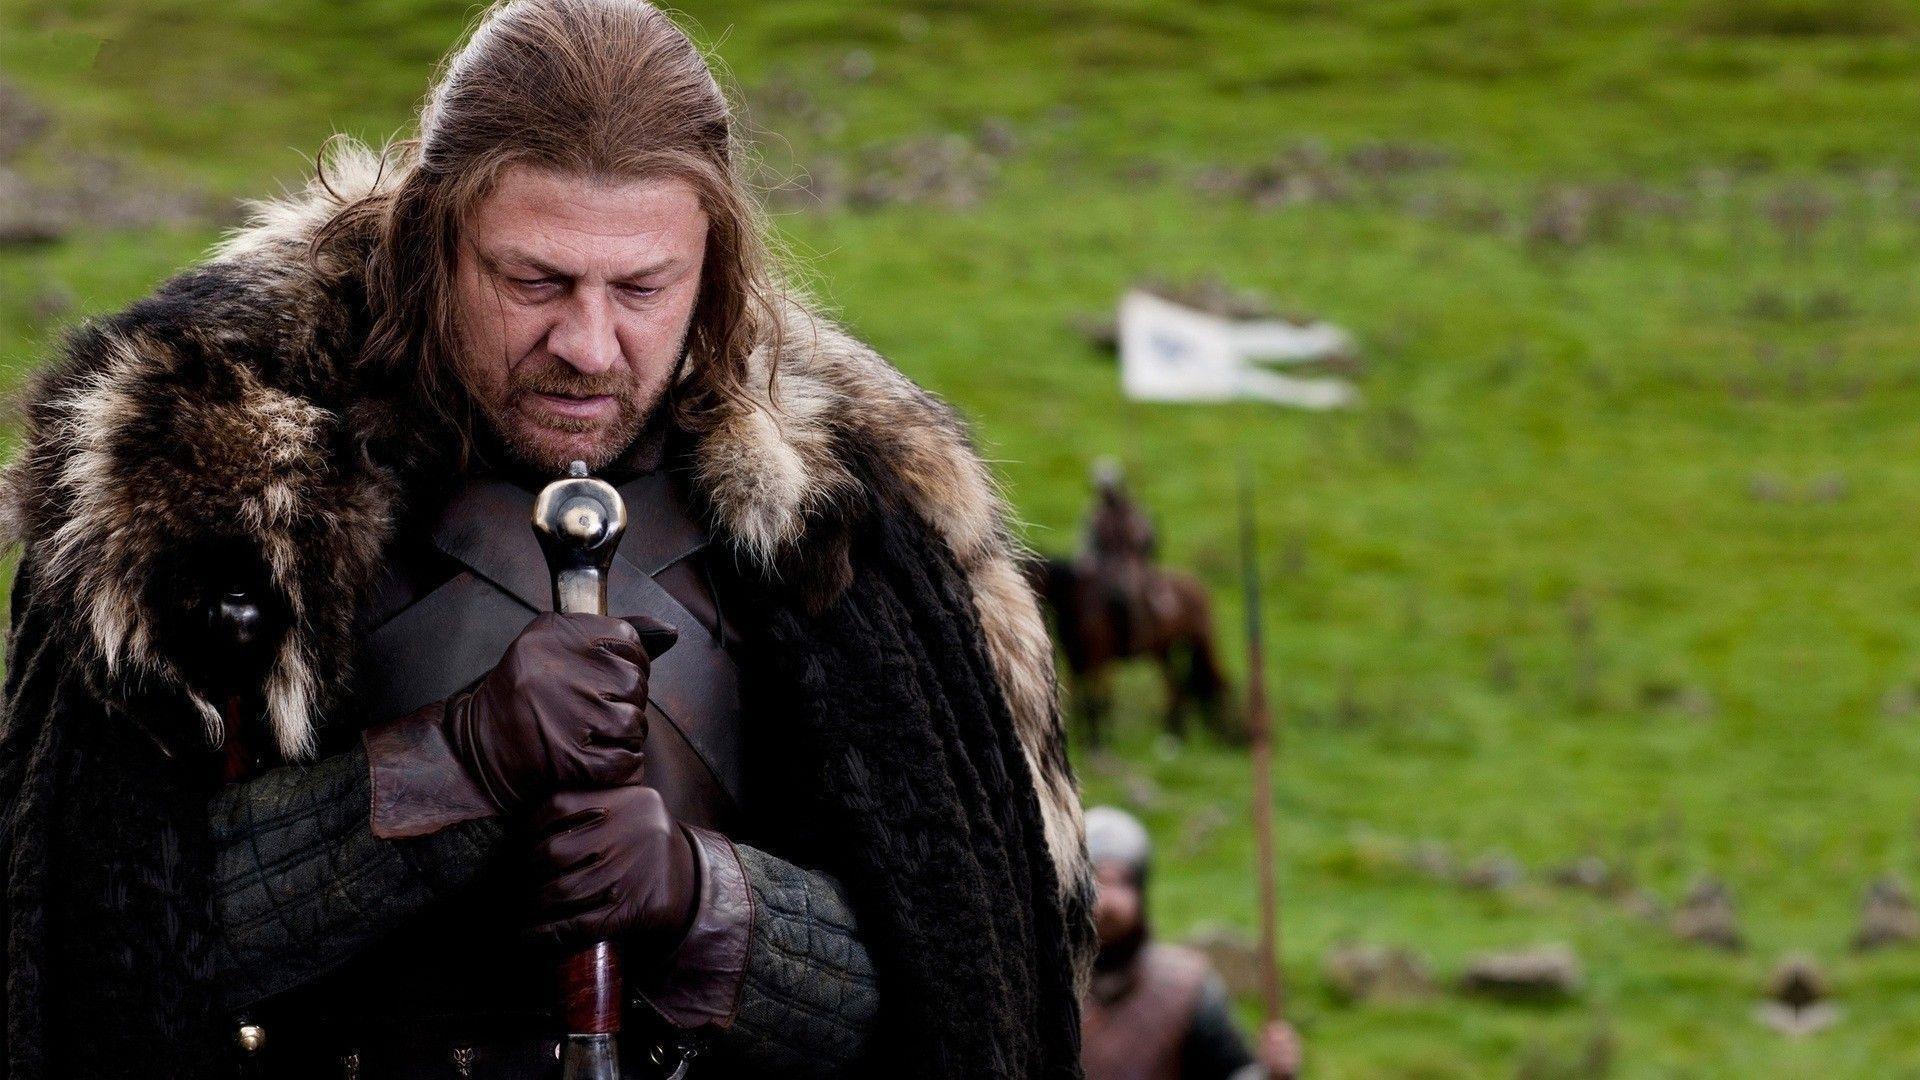 1170428 Game of Thrones, Winter Is Coming, Ned Stark, Sean Bean, darkness,  screenshot, computer - Rare Gallery HD Wallpapers